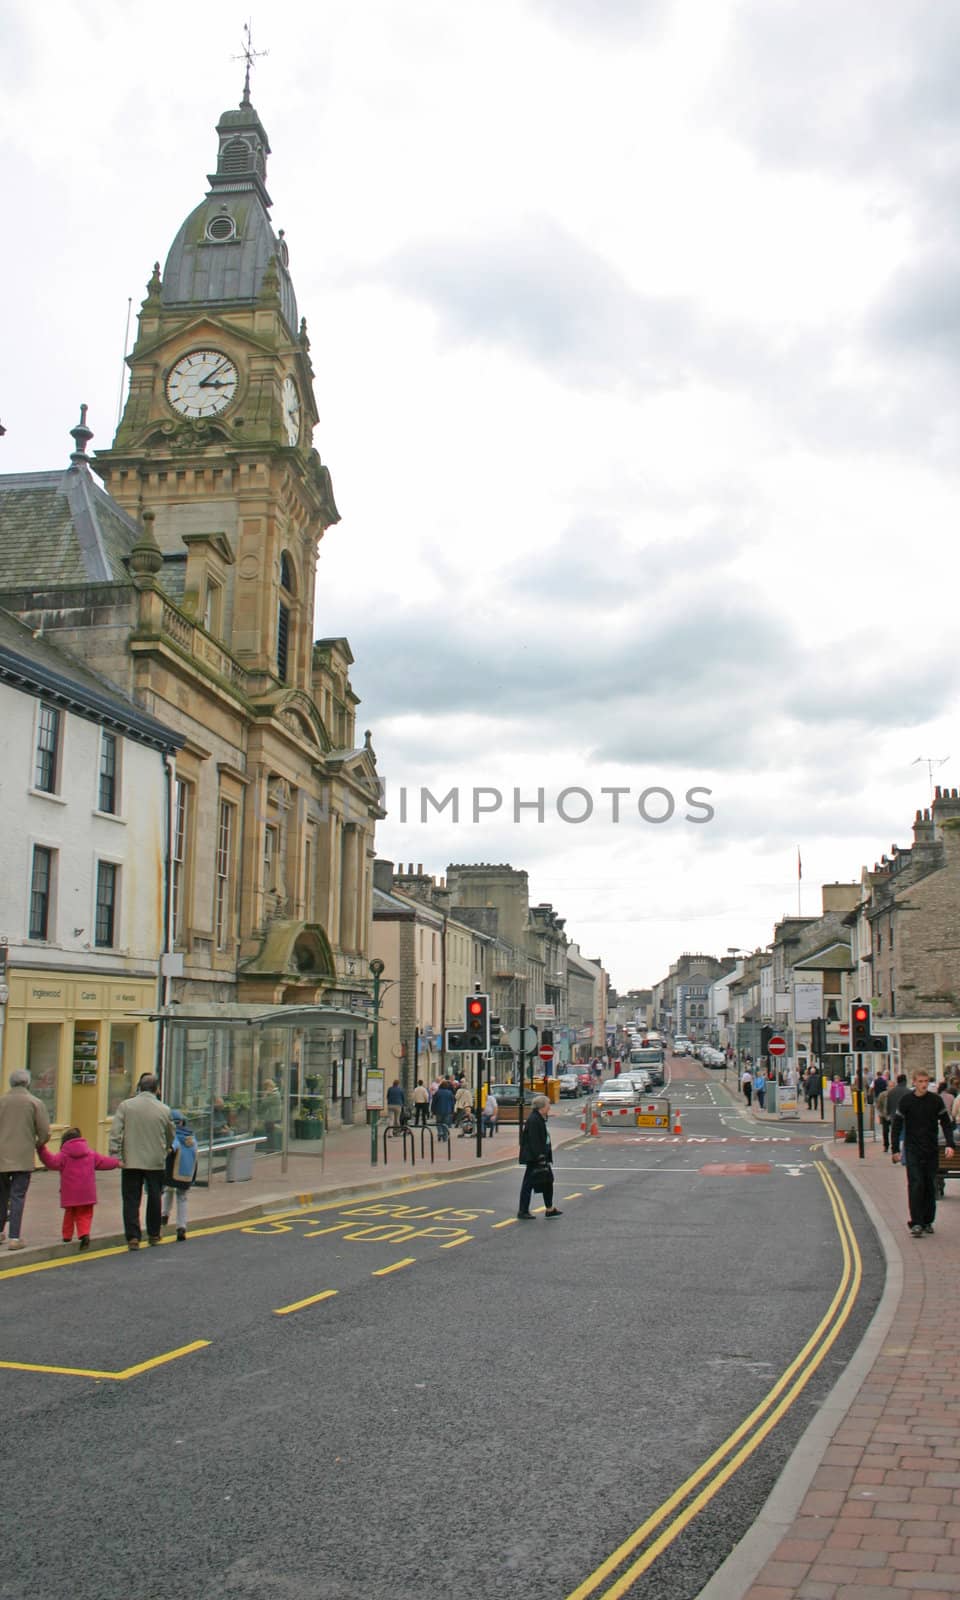 Shoppers and Tourists in Kendal